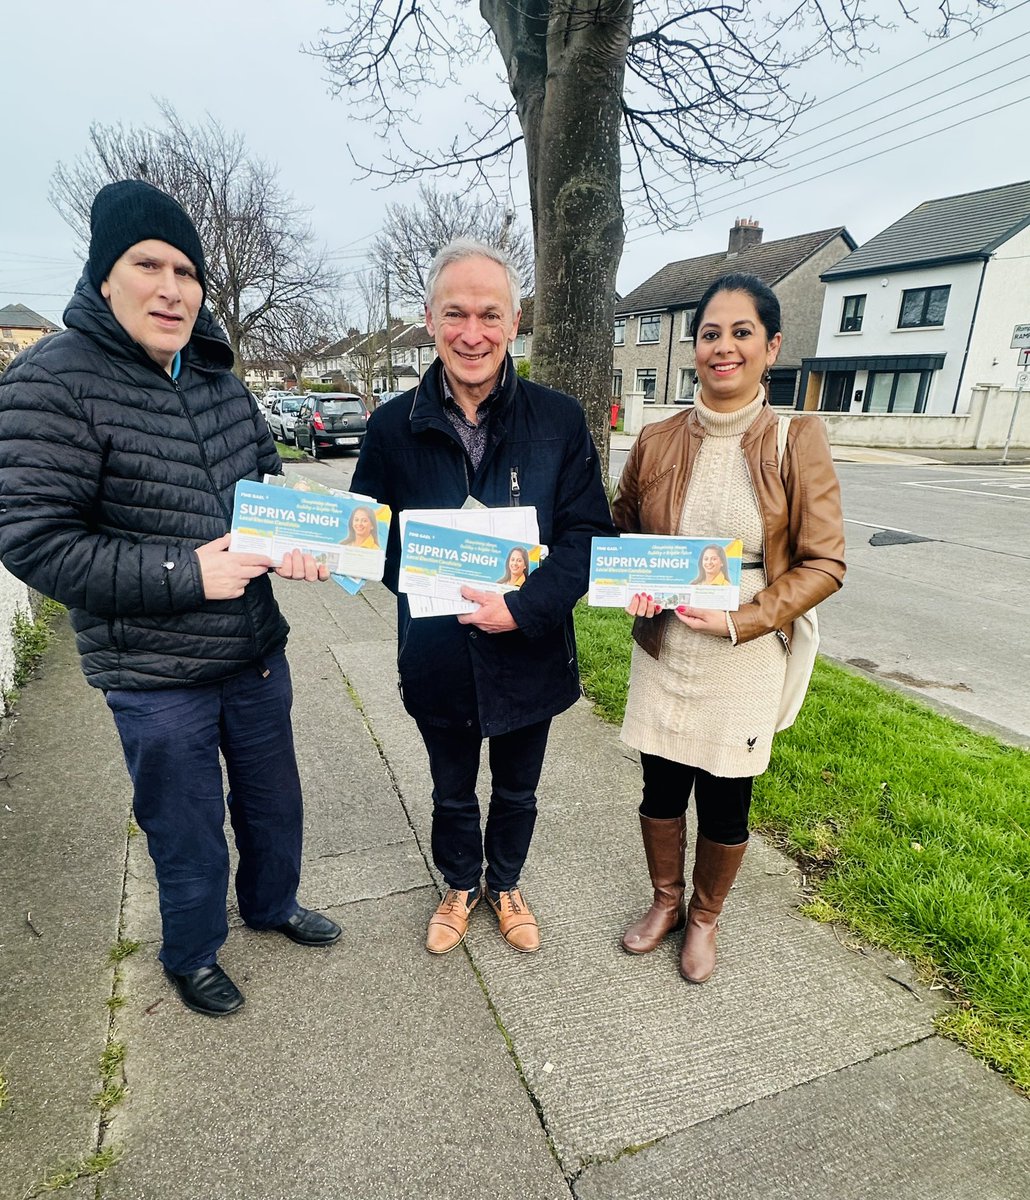 Wonderful canvassing this evening in Raheny with @RichardbrutonTD. Great reception on doors. I look forward to working on the concens received on doors. If I have missed you, please do not hesitate to reach out to me at supriyasinghfg@gmail.com @DBNFineGael @FineGael